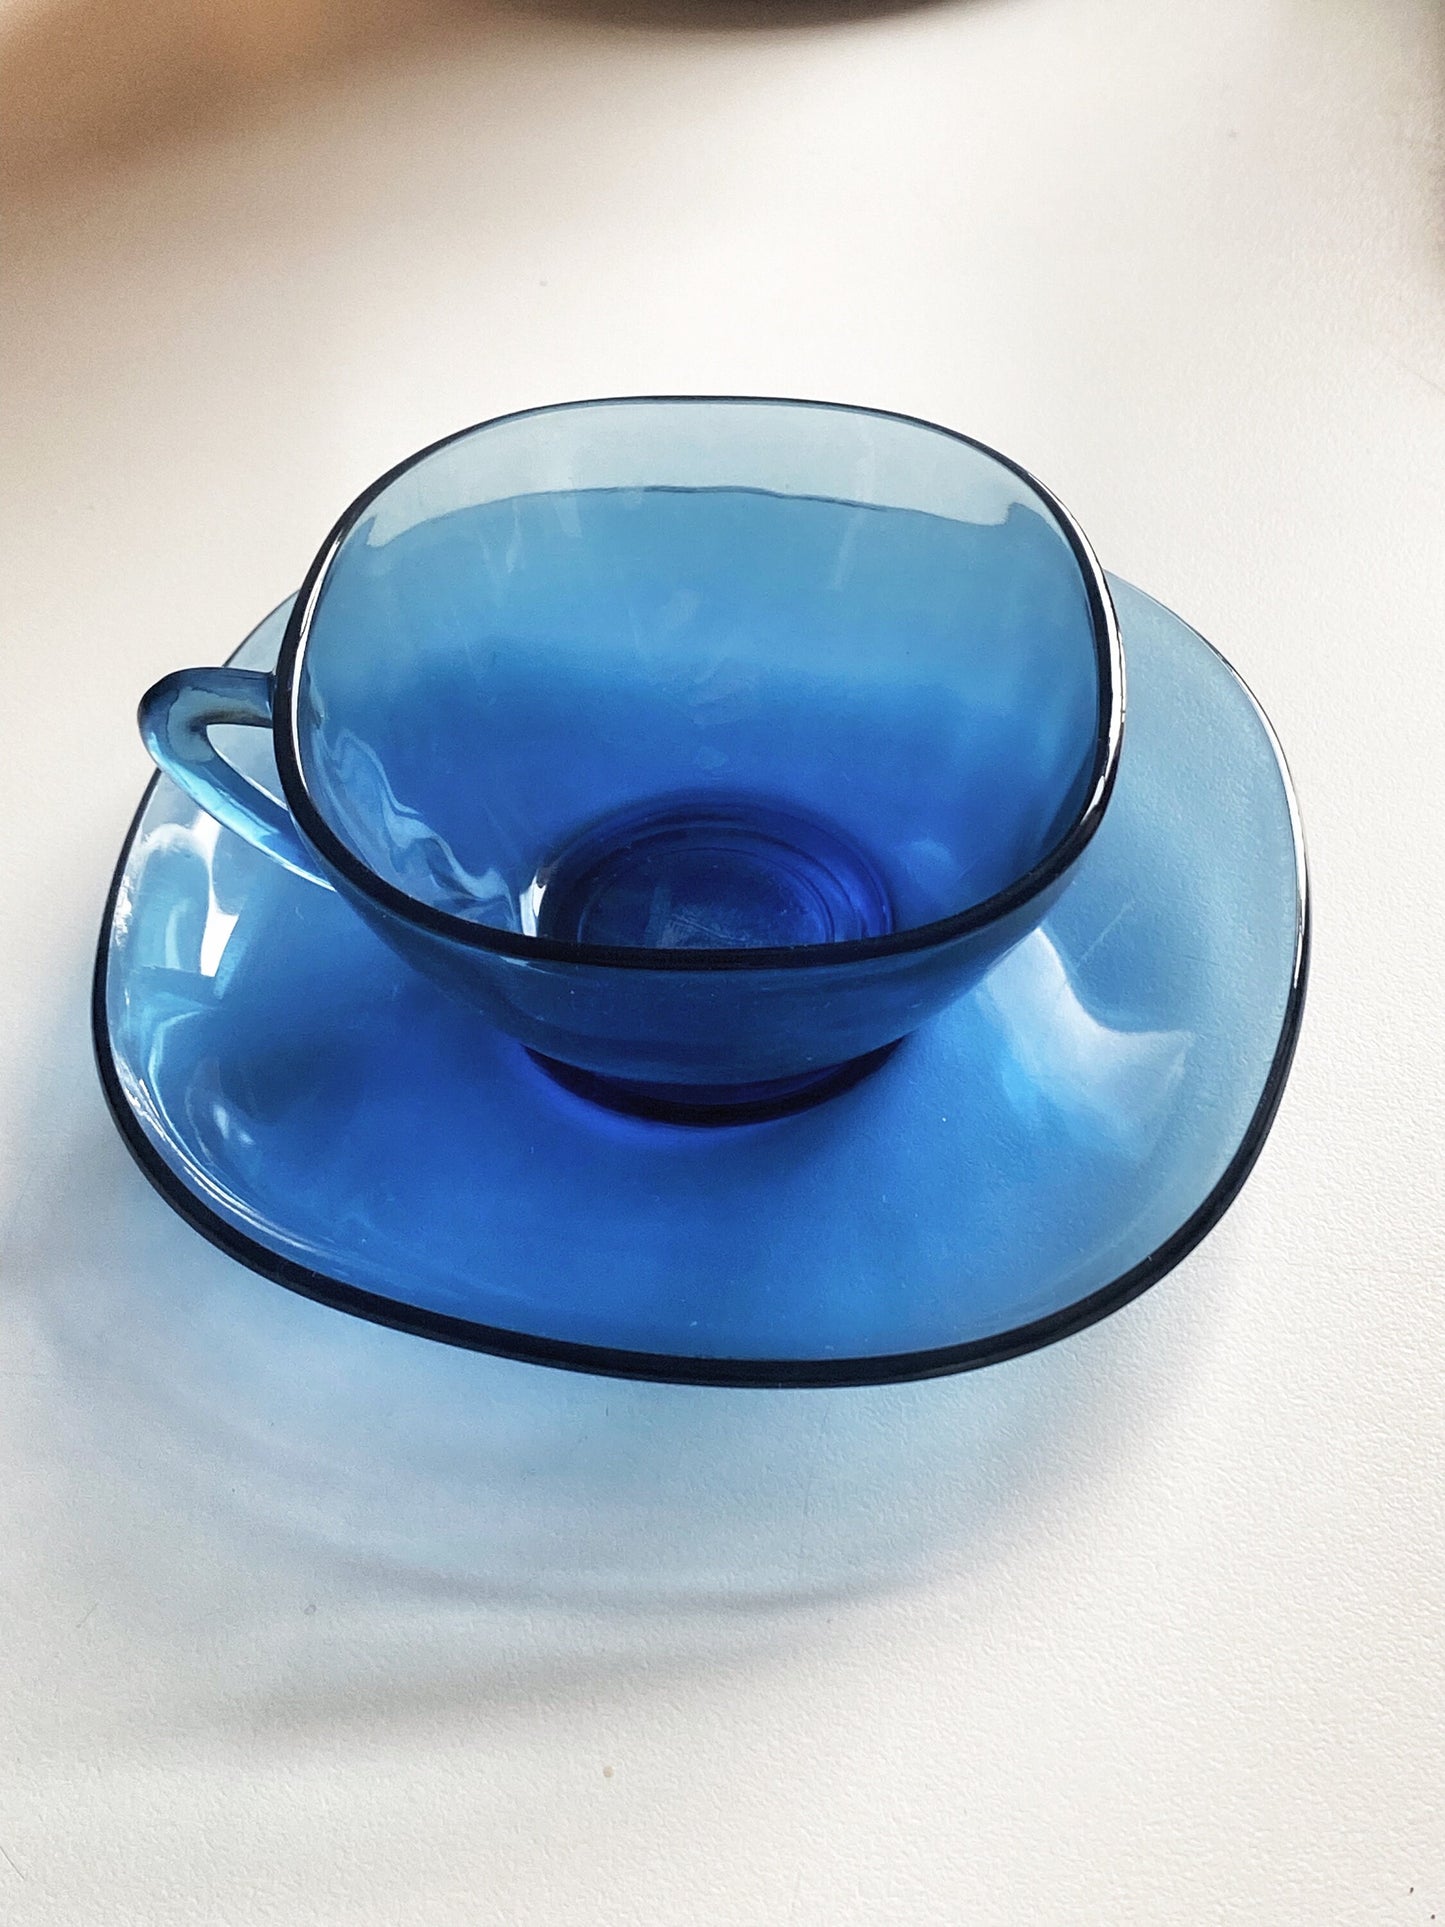 6 Vintage Midcentury Blue Glass Coffee Cups and Saucers by French brand Vereco